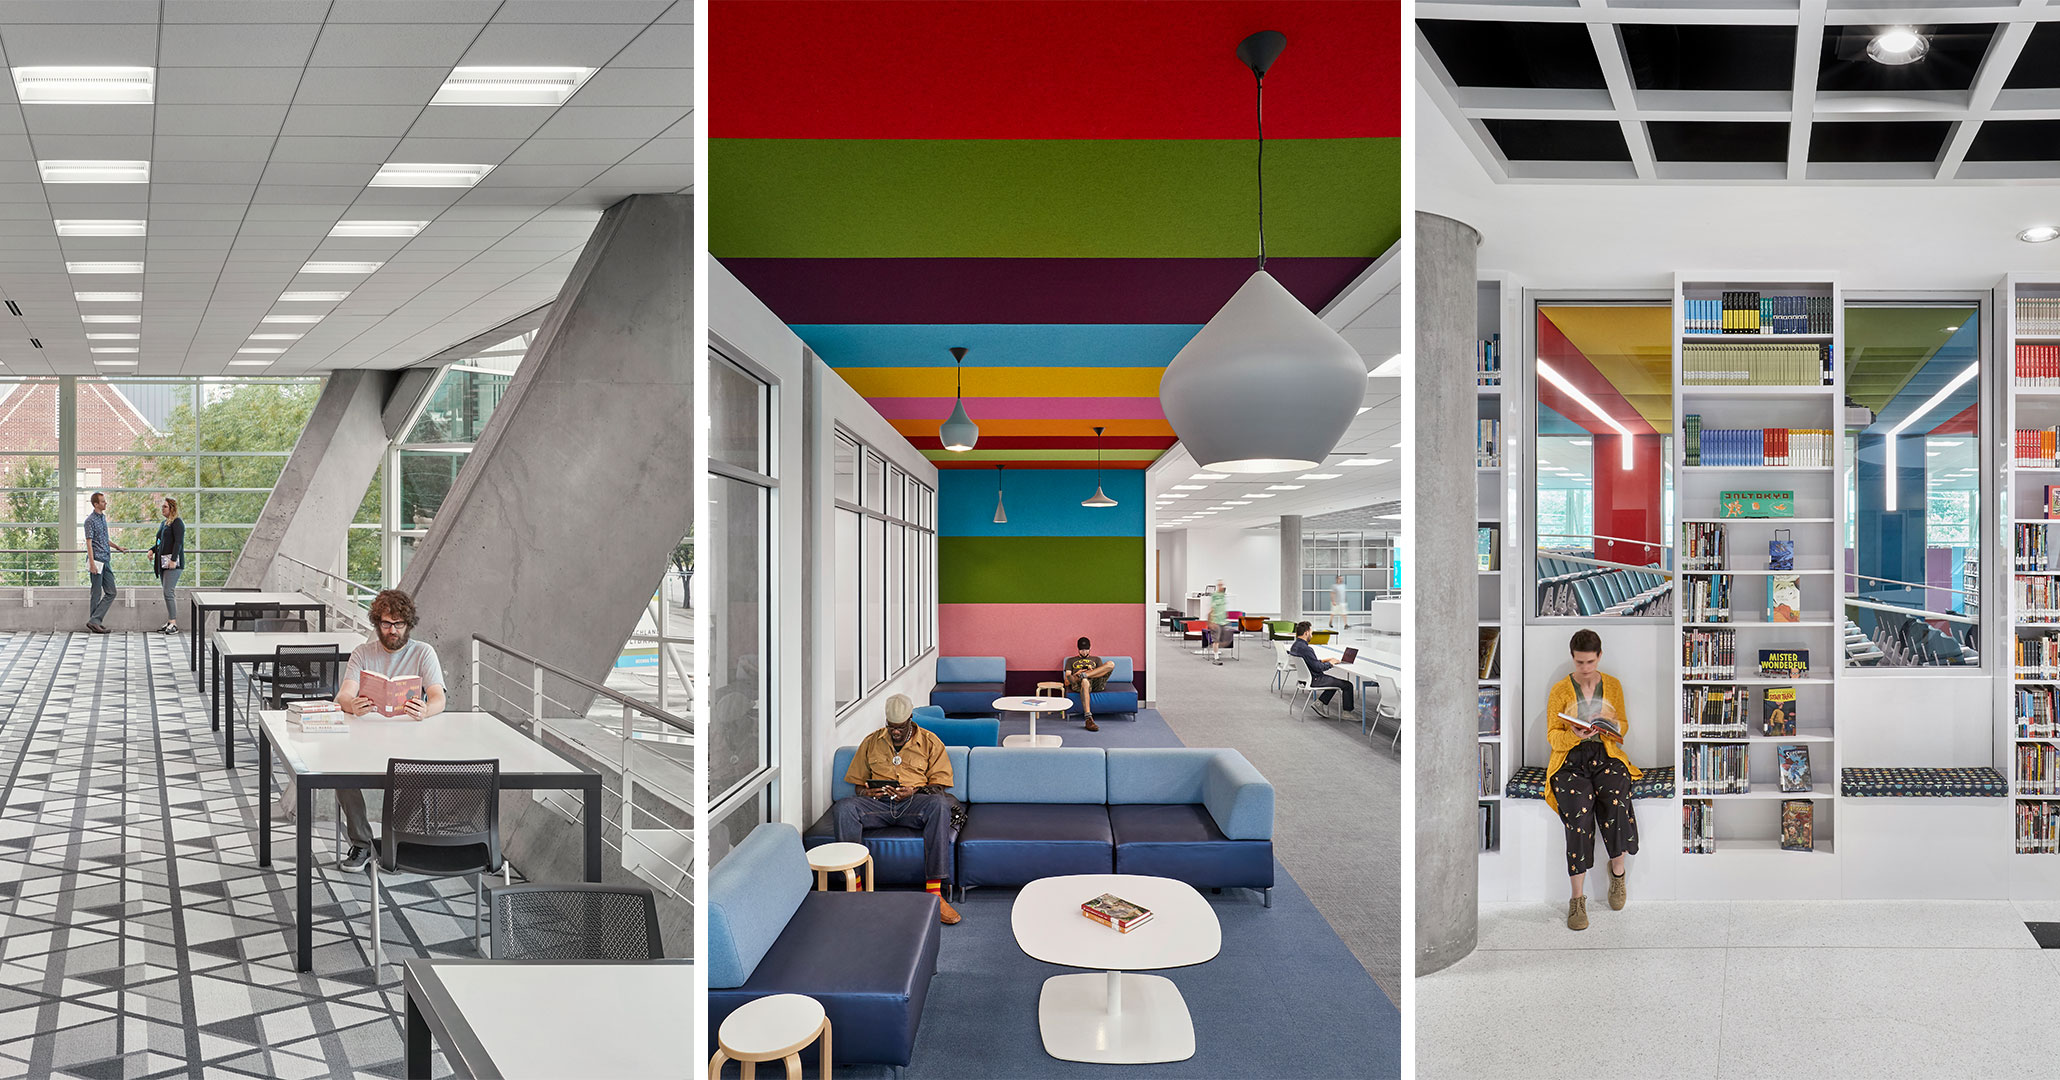 Richland County Library worked with Boudreaux architects to design modern engaging spaces.